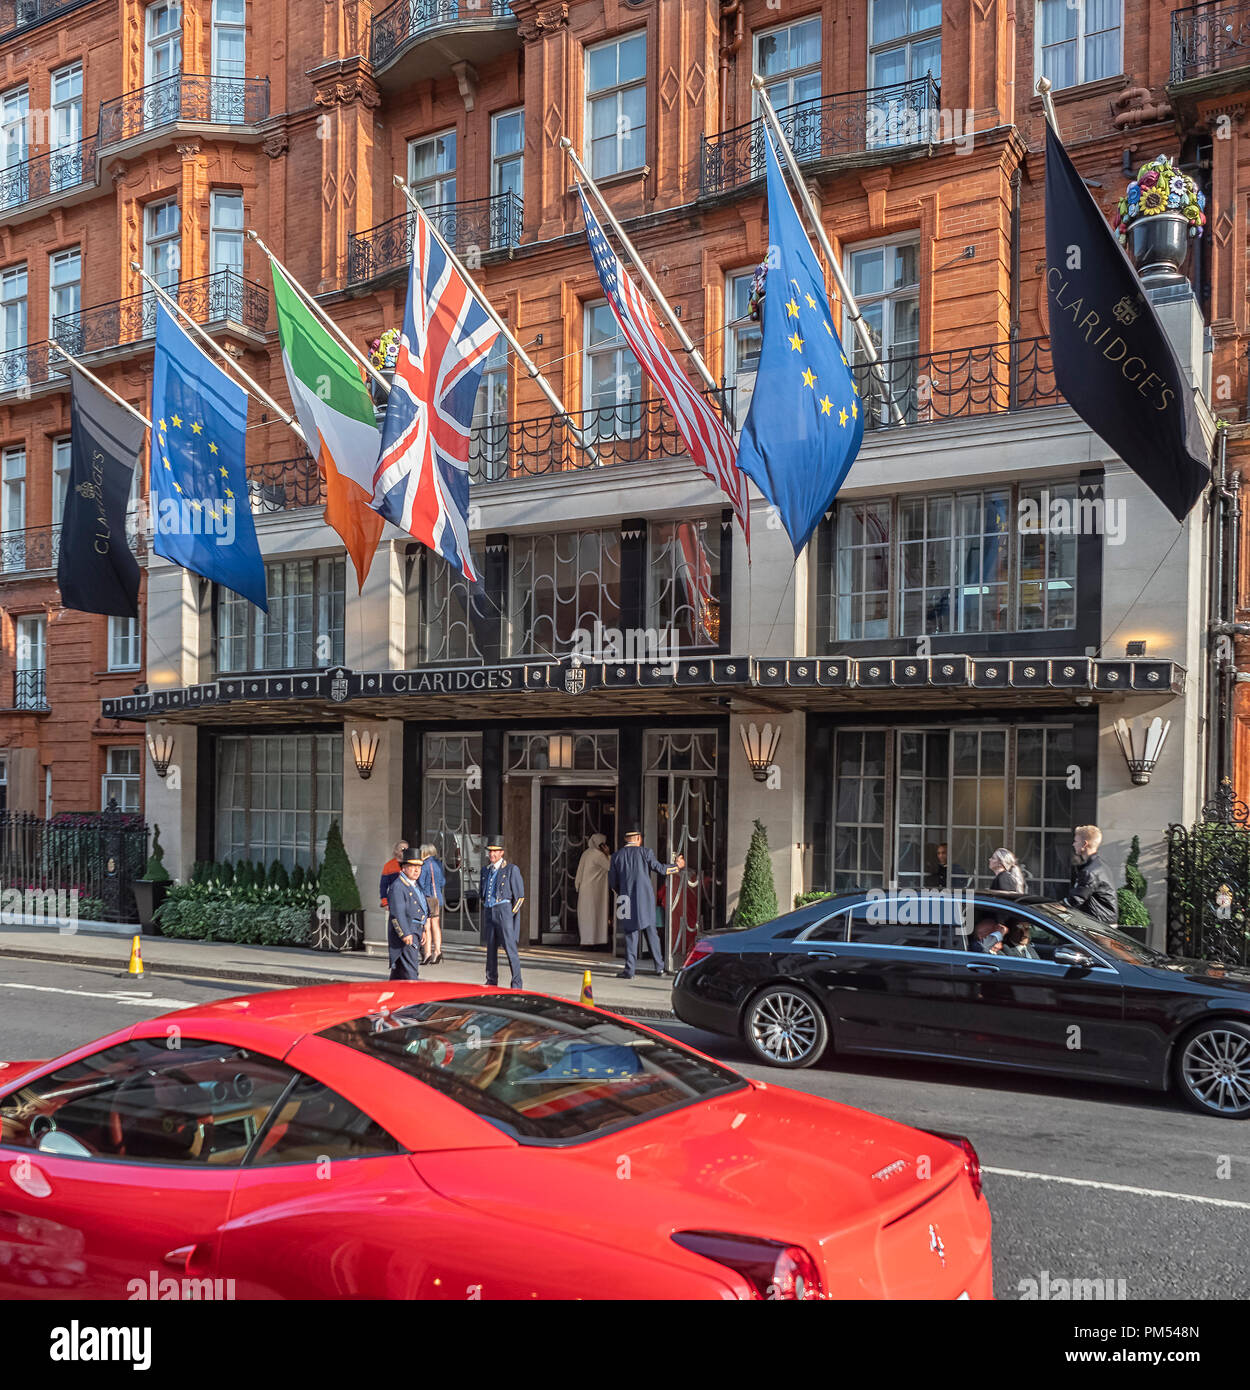 Claridges High Resolution Stock Photography and Images - Alamy